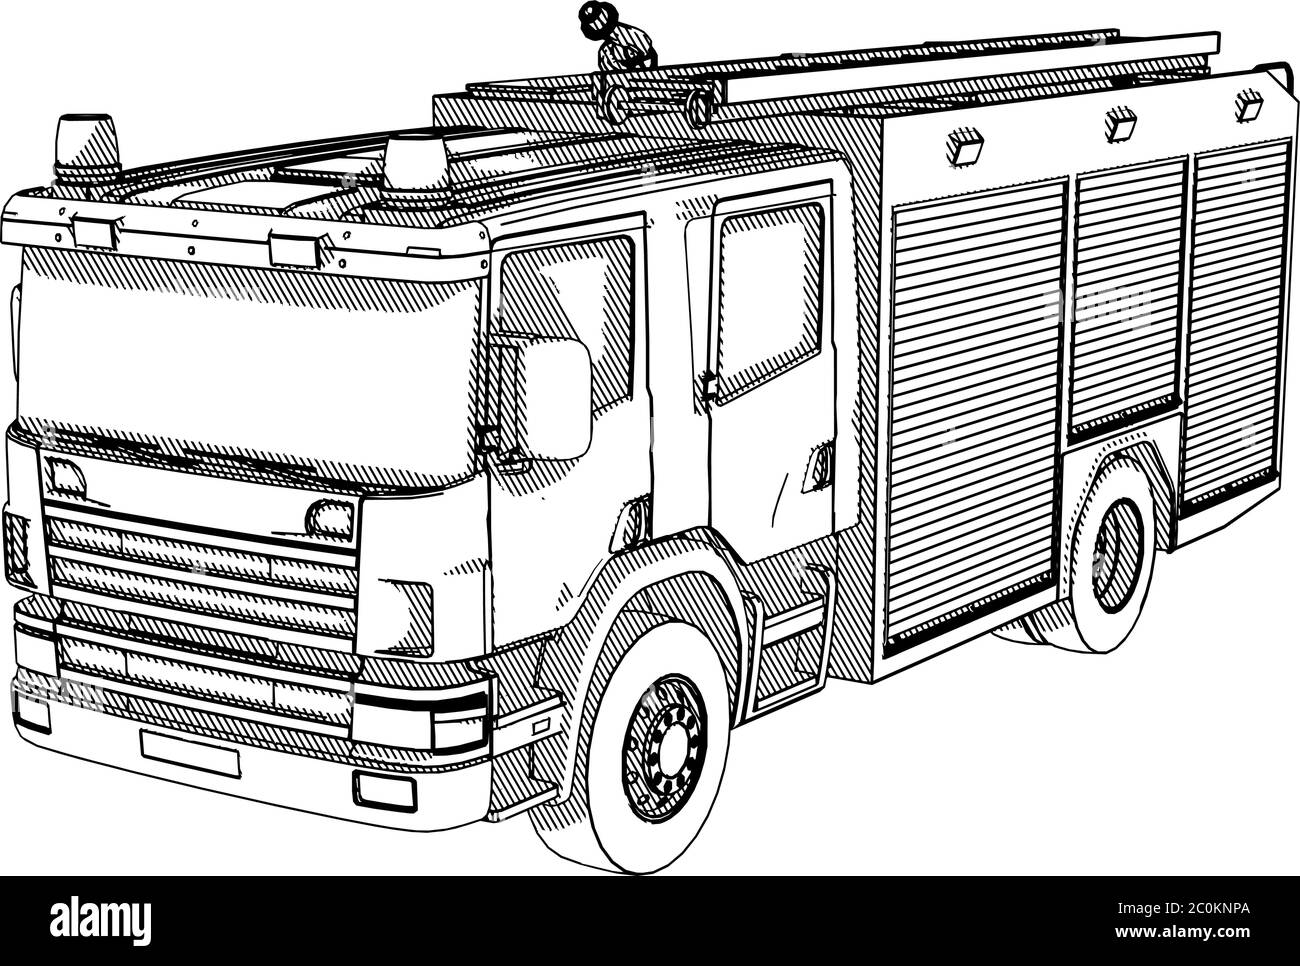 5144 Fire Truck Drawing Images Stock Photos  Vectors  Shutterstock